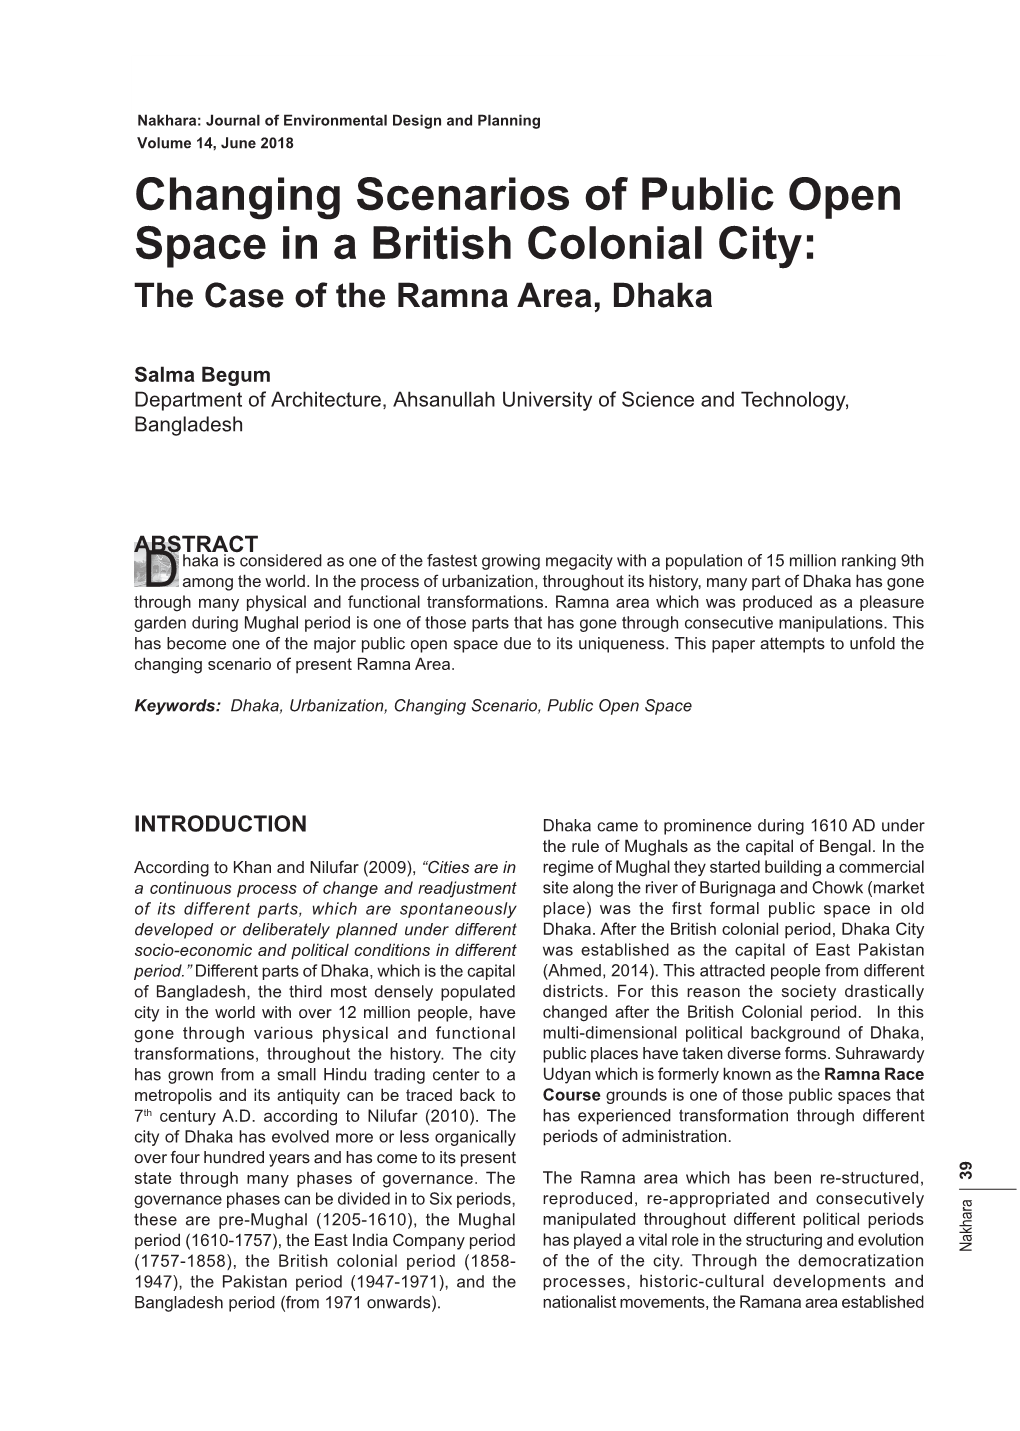 Changing Scenarios of Public Open Space in a British Colonial City